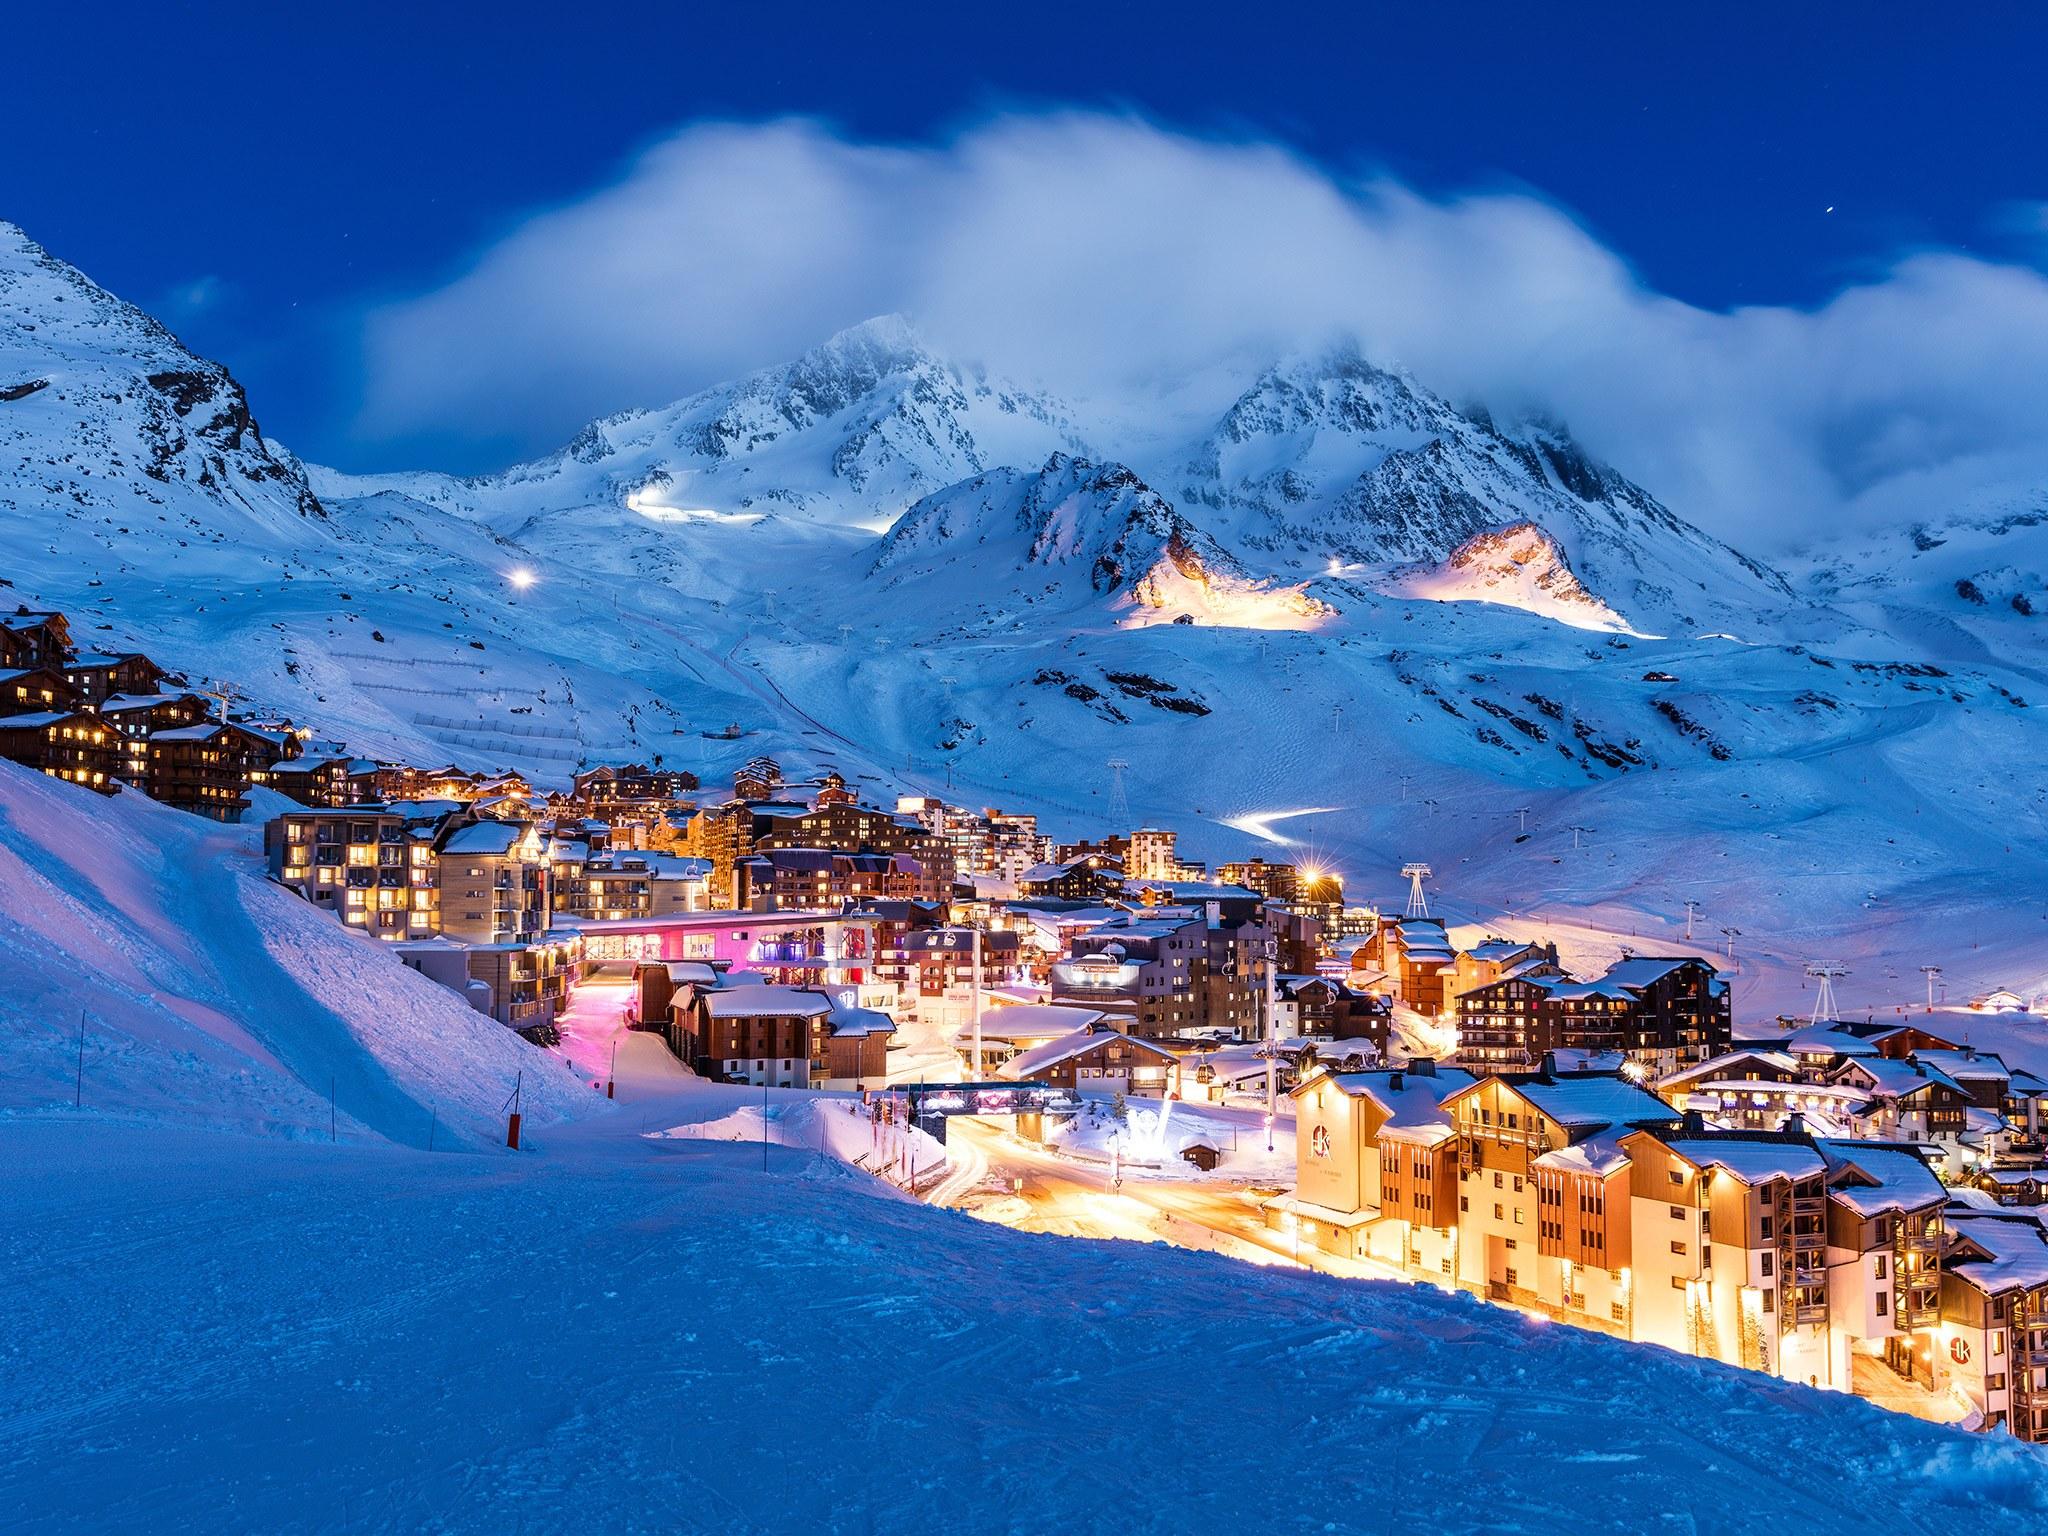 The Best Ski Resorts in Europe: 2018 Readers' Choice Awards